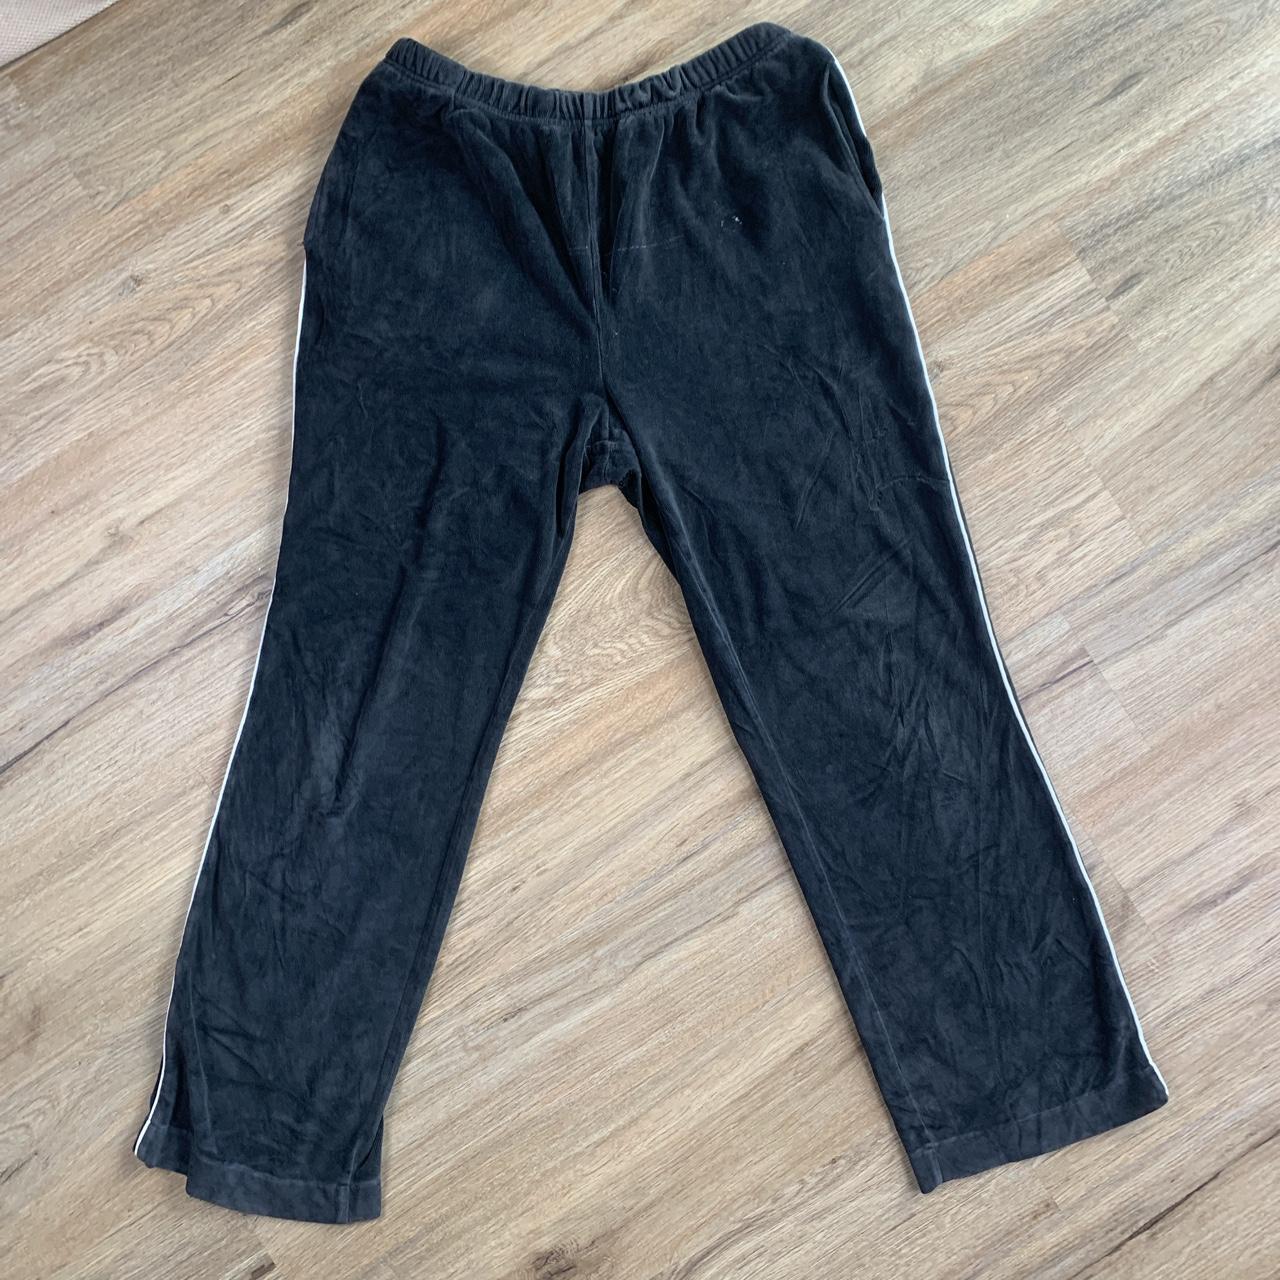 Christian Dior Women's Black and White Joggers-tracksuits | Depop